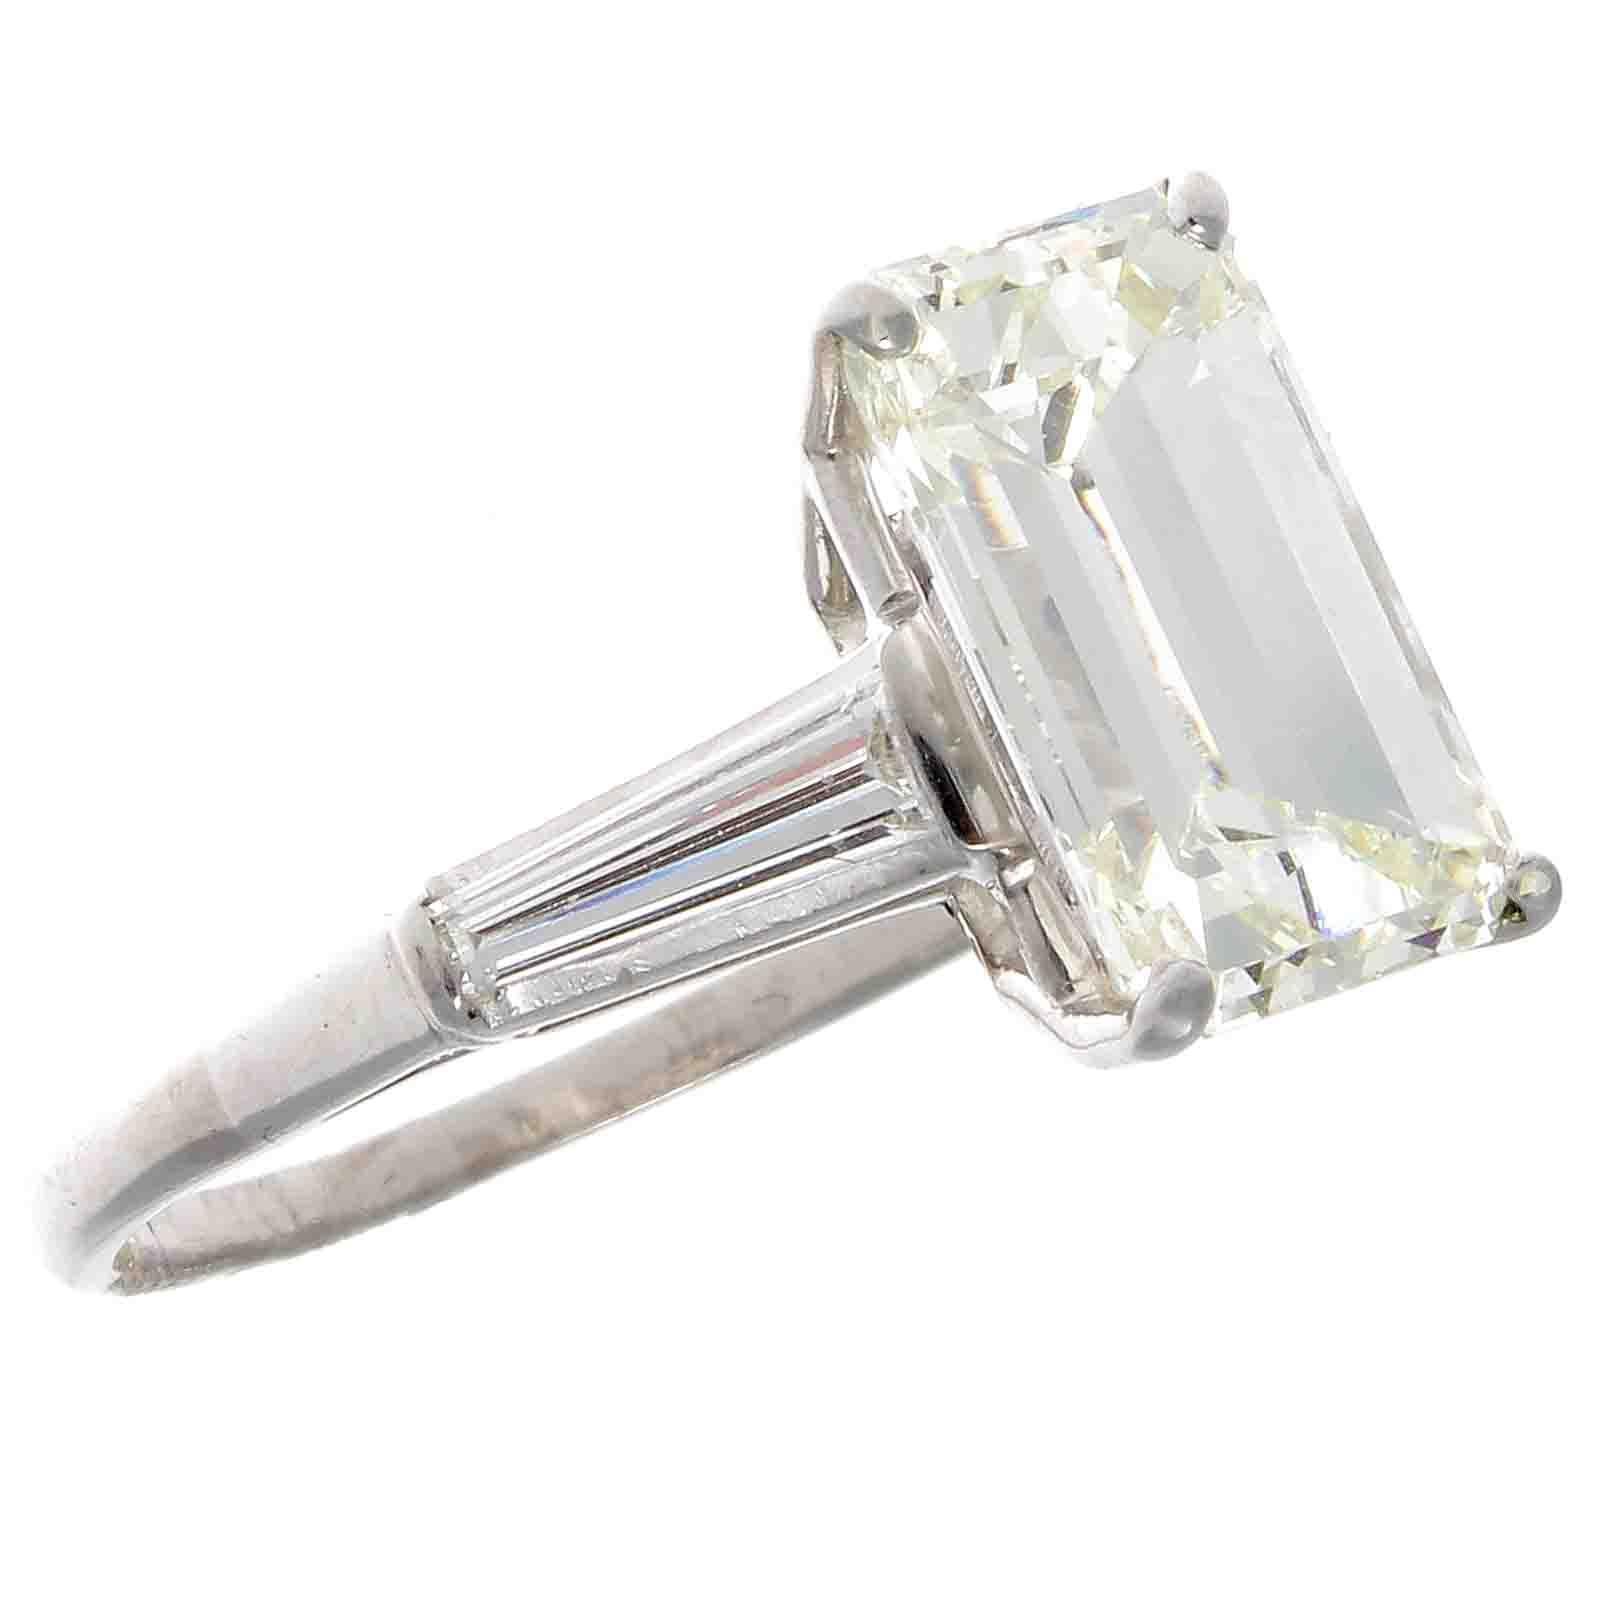 Featuring a seductively elongated emerald cut diamond that is M color, VS2 clarity. Elegantly flanked on either side by a tapered baguette which has became the customary ring of choice. Hand crafted in platinum. Stamped with French hallmarks.

Ring